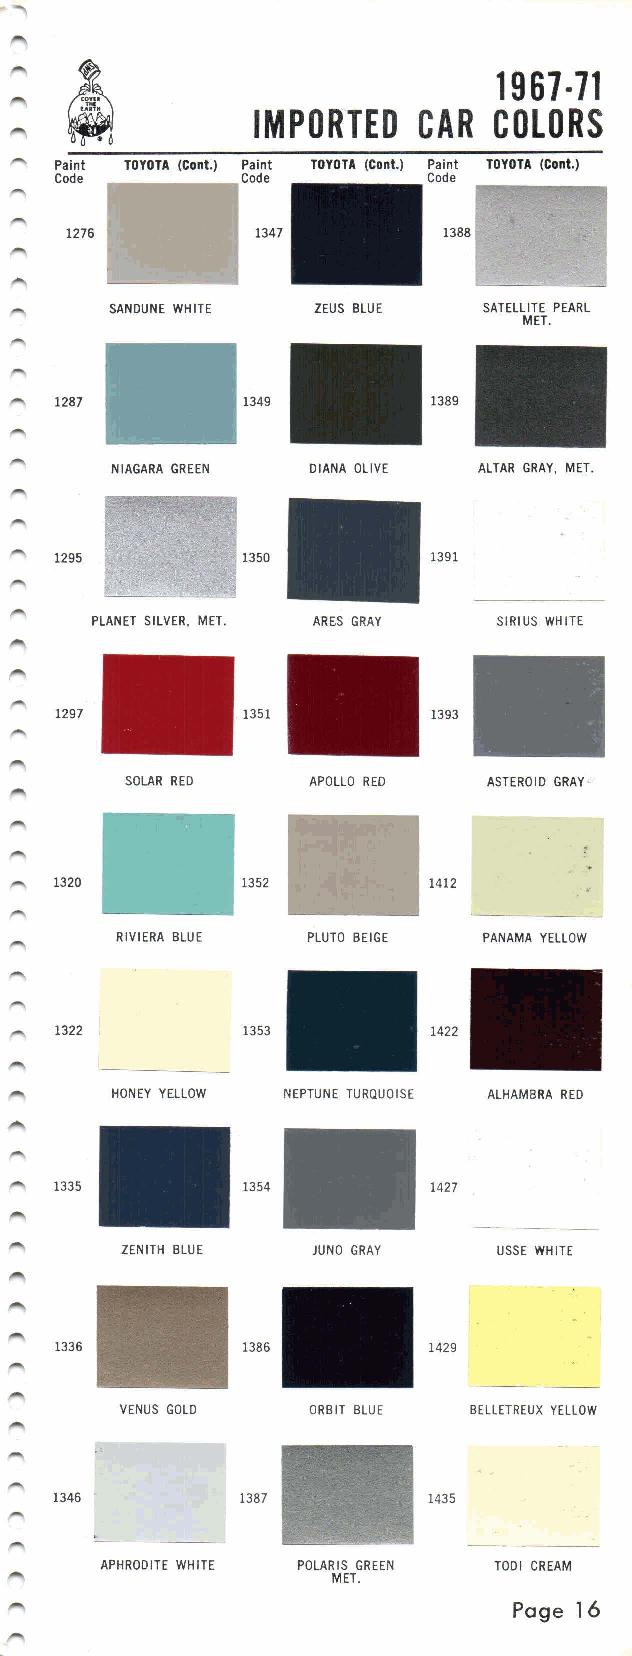 1967, 1968, 1969, 1970, 1971 Toyota, Paint, Code, Color Chart